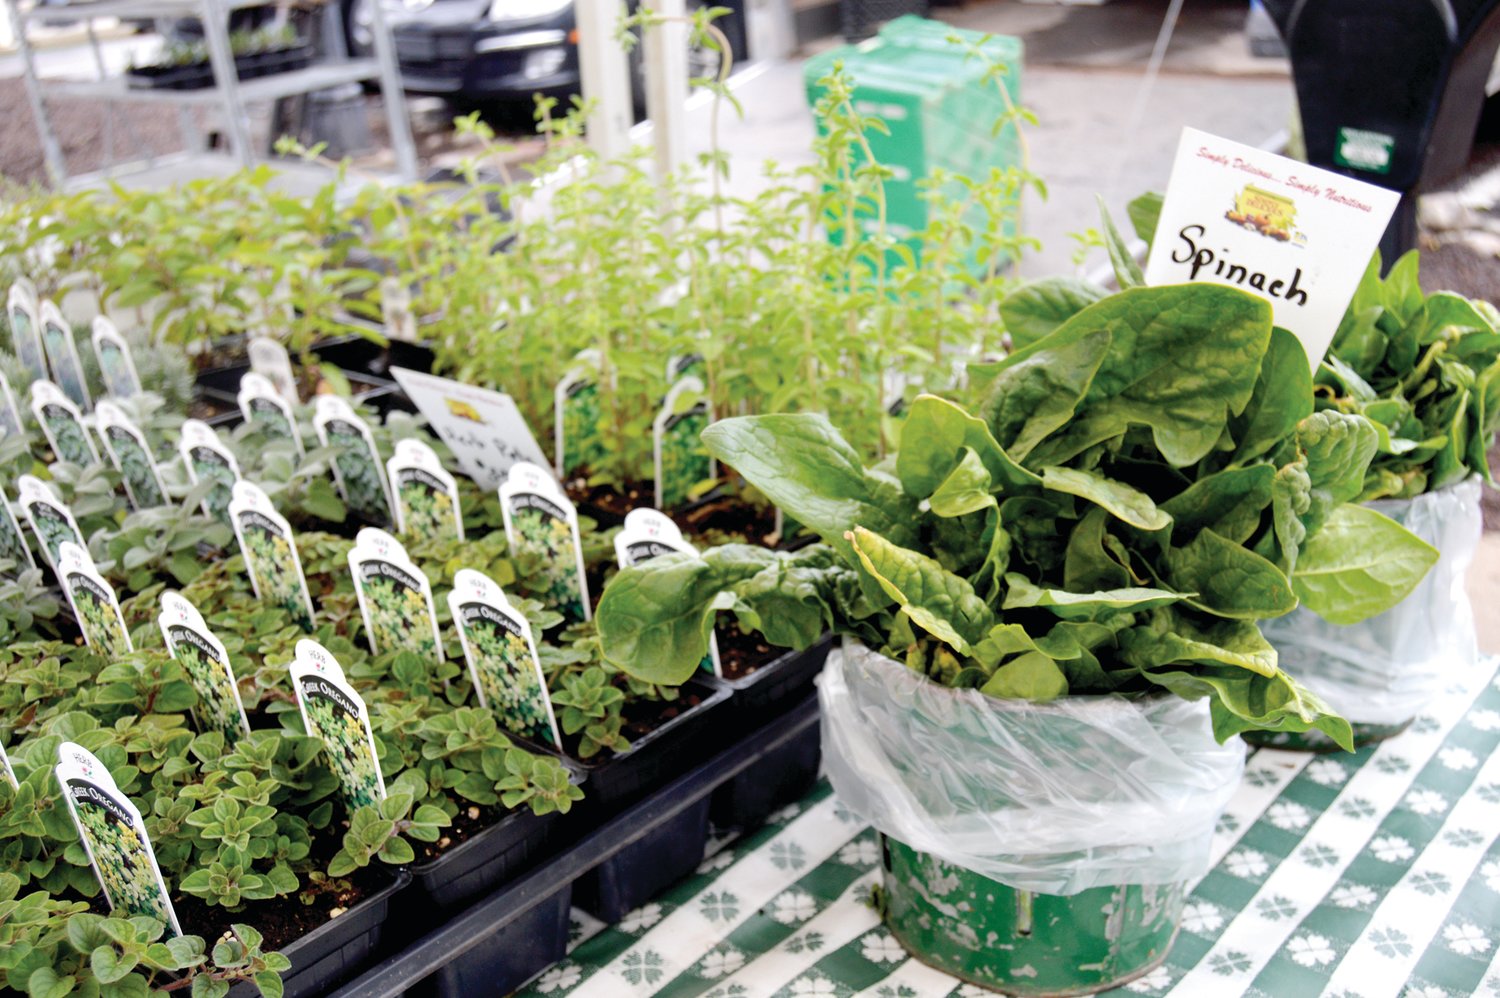 Spinach and fresh herbs were among the early spring crops for sale at the first Doylestown market of the harvest season.